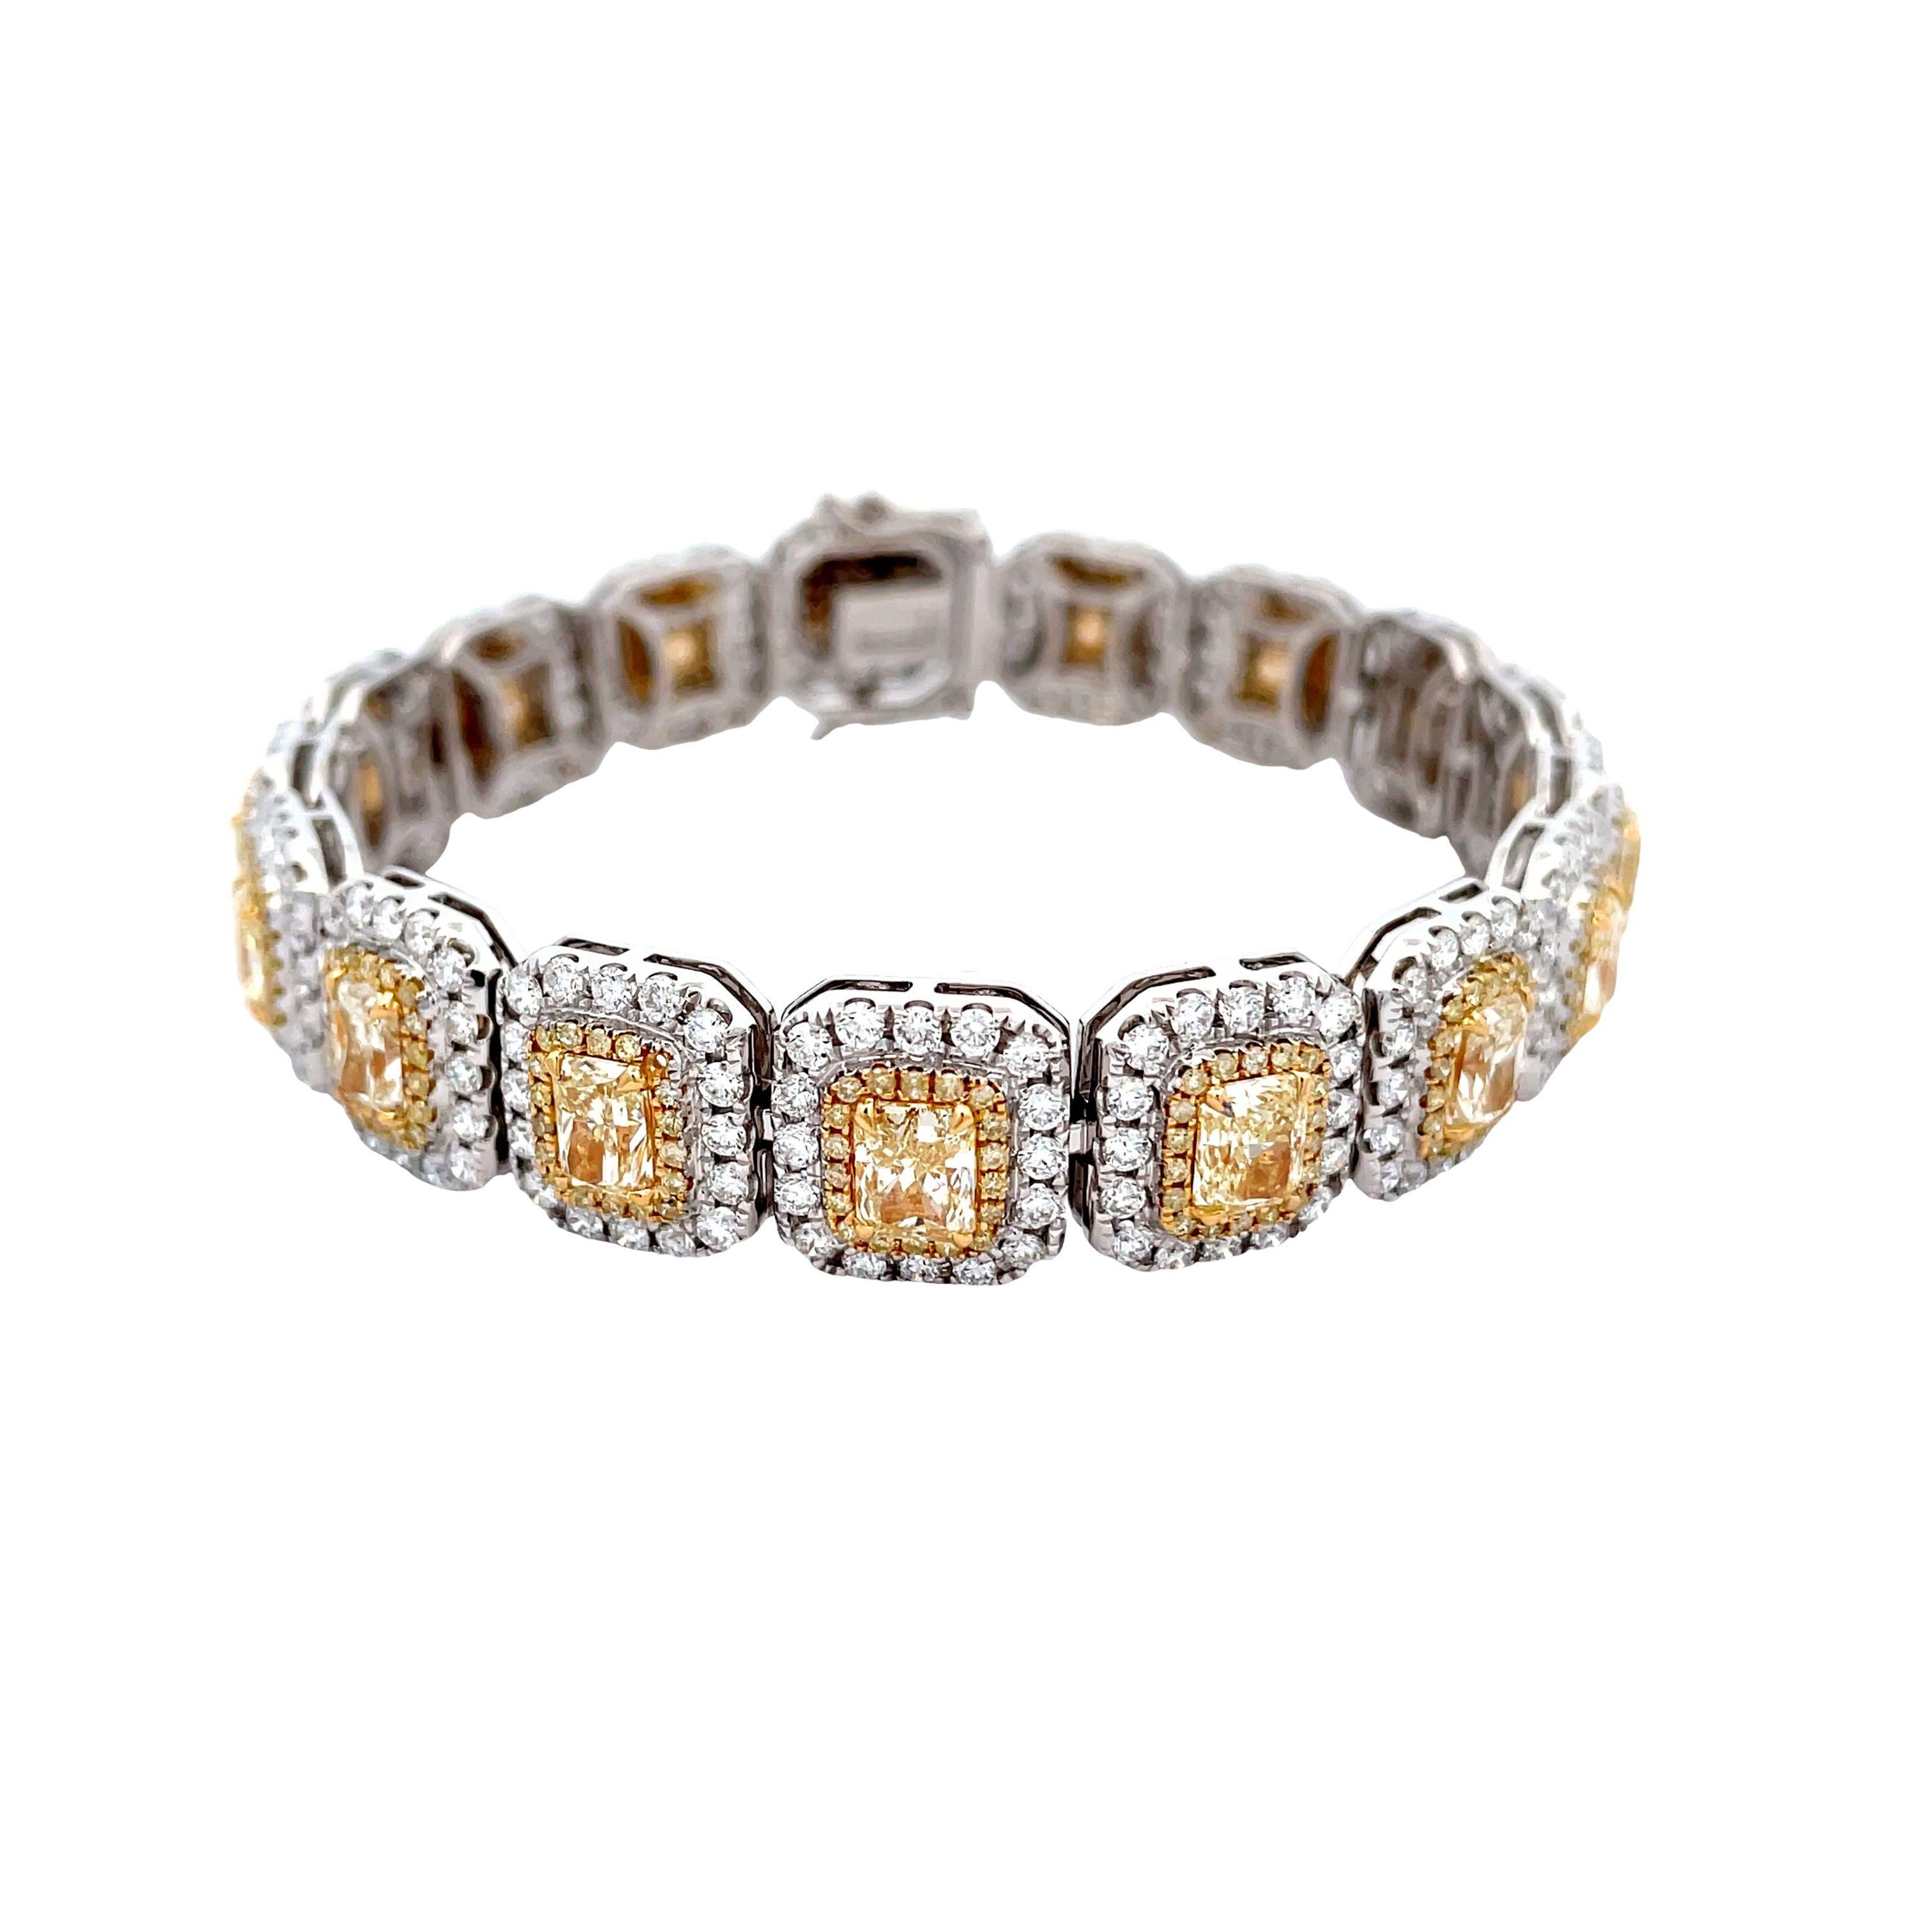 Diamond Shape: The white diamonds are round-cut, while the yellow diamonds come in mixed shapes 
Metal: The bracelet is made of 18 karat yellow and white gold (denoted as 18KY/W, indicating a combination of yellow and white gold)
Design: The